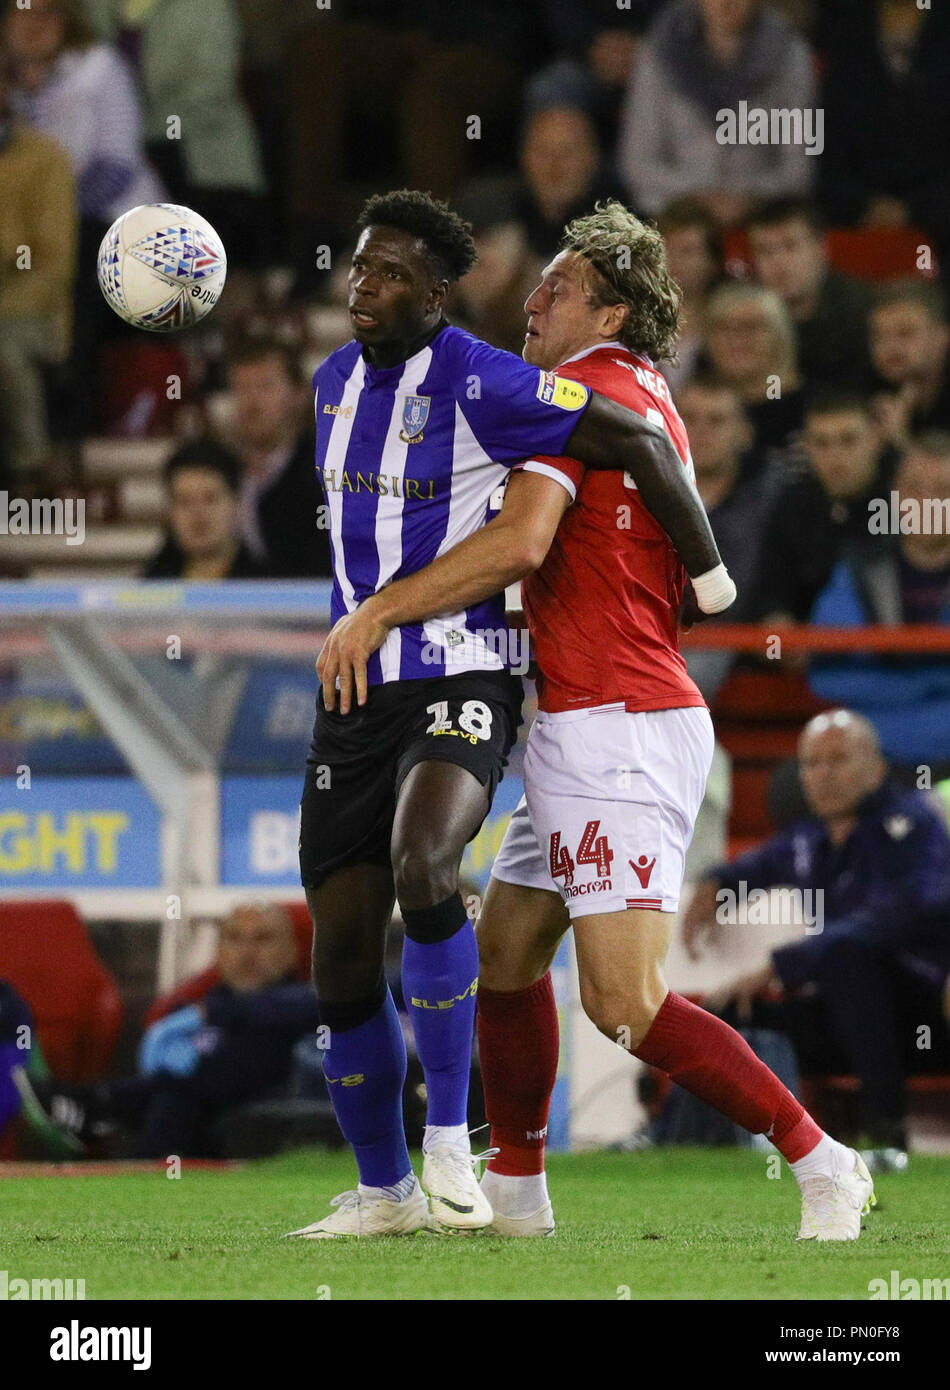 Sheffield Wednesday's Lucas Joao (left) and Nottingham Forest's Michael Hefele battle for the ball during the Sky Bet Championship match at the City Ground, Nottingham. Stock Photo